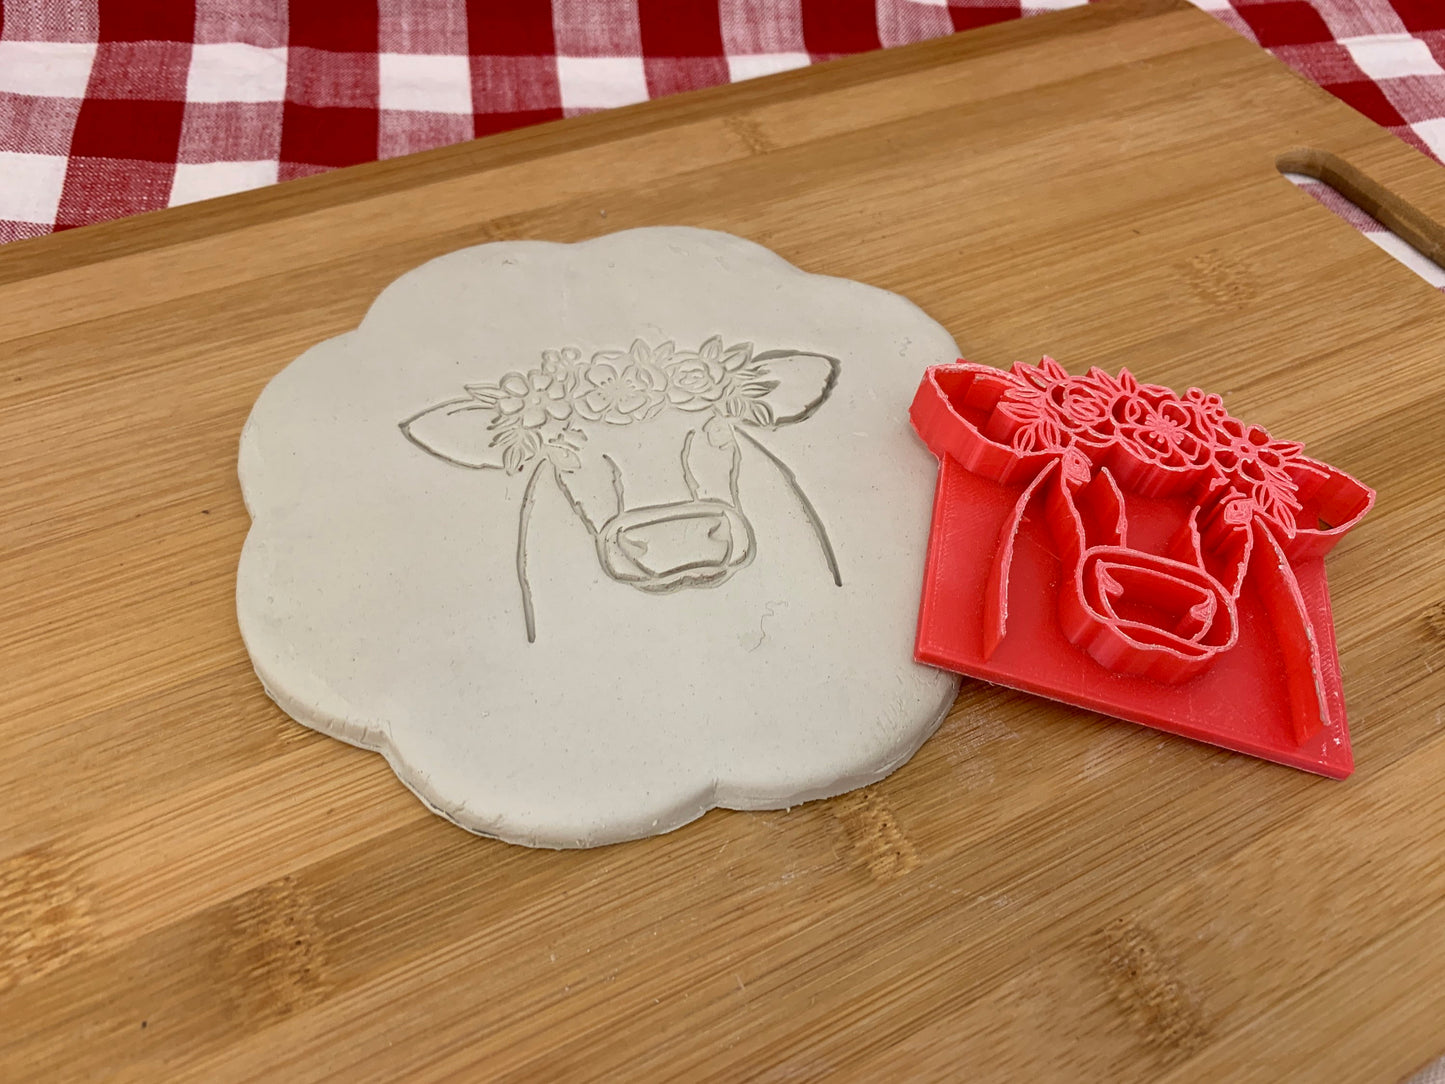 Pottery Stamp, cow face with floral wreath design - multiple sizes